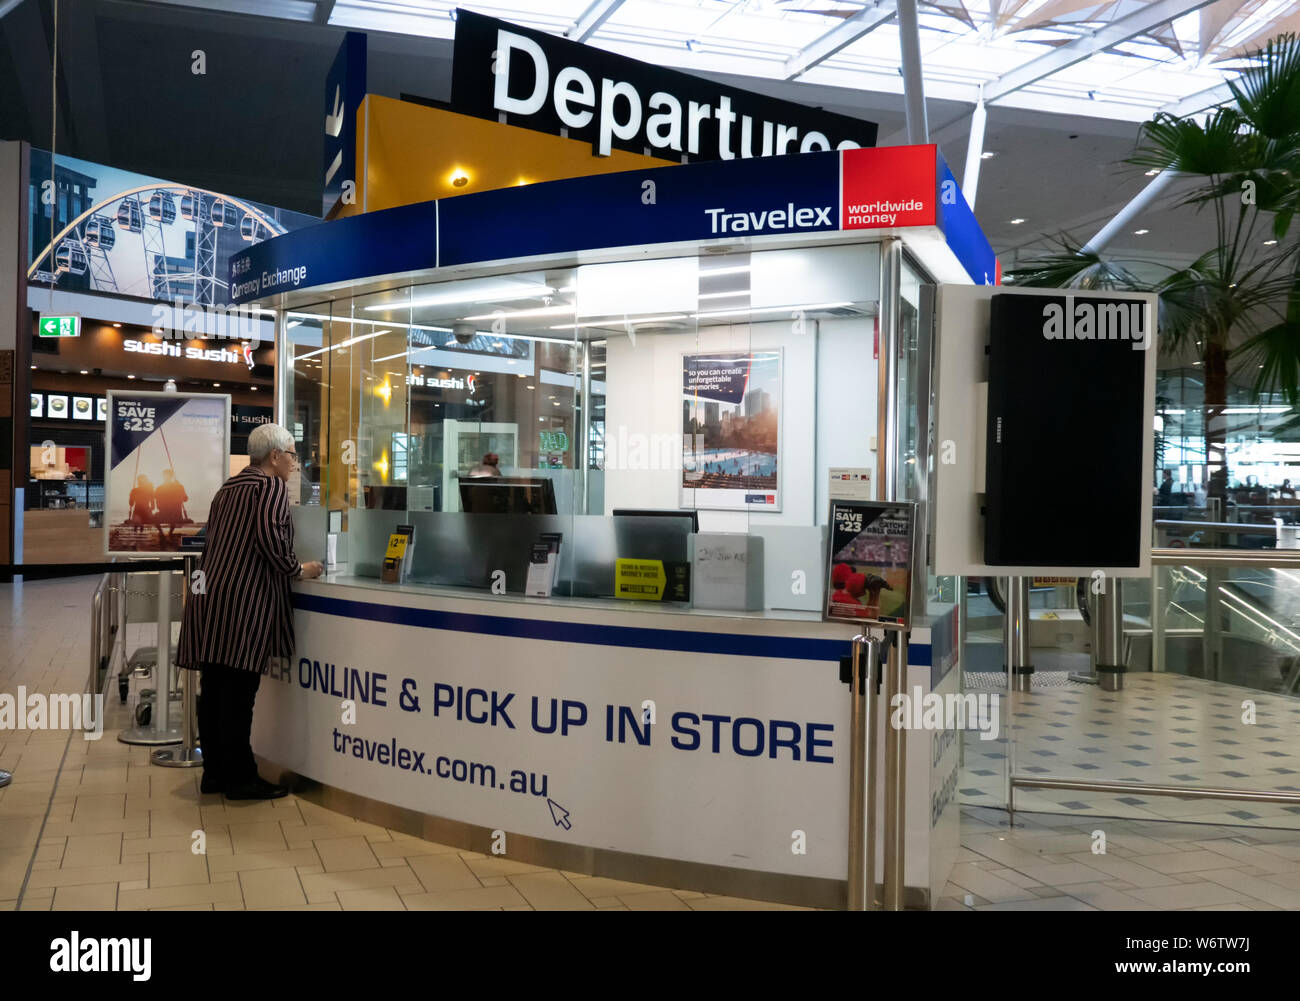 Lady traveller exchanging currencies at the Travelex desk at Brisbane airport, International Terminal, Queensland, QLD, Australia Stock Photo